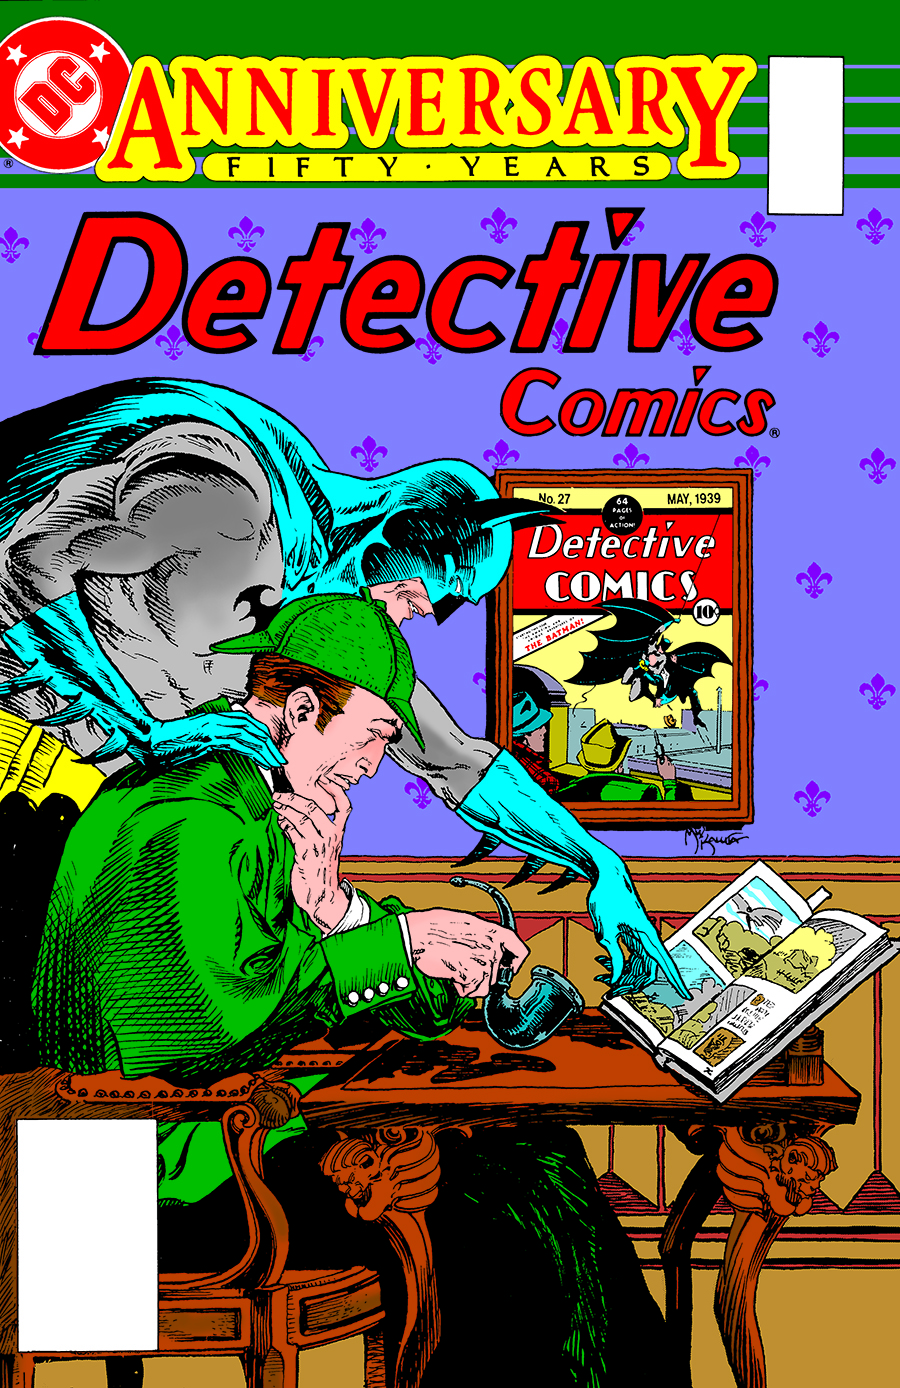 DCS GREATEST DETECTIVE STORIES EVER TOLD TP